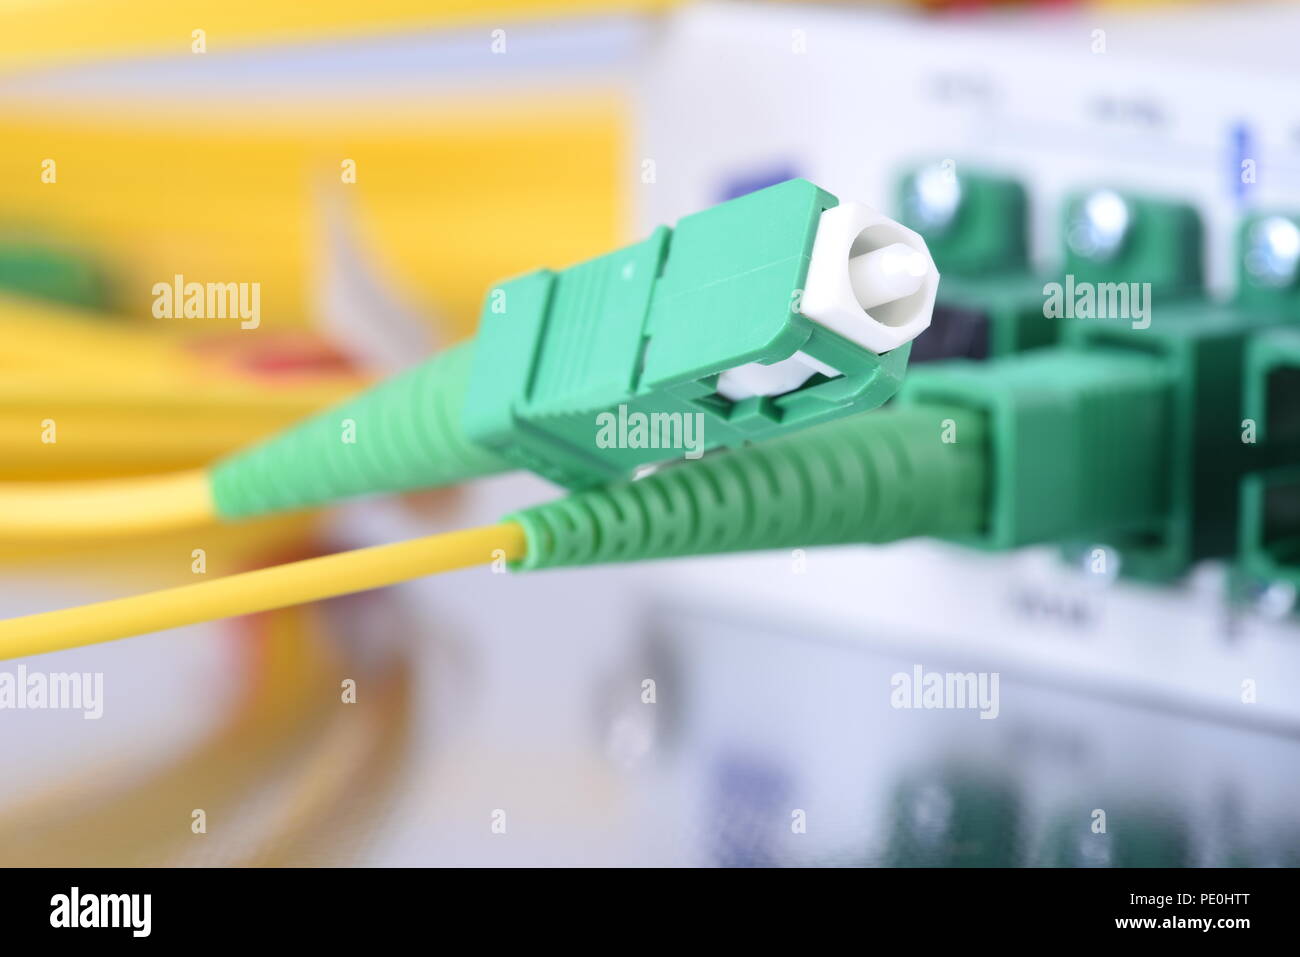 Passive Optical Network, Patch cord with Selective Focus and Network Equipment with Connected Cables in the Background Stock Photo